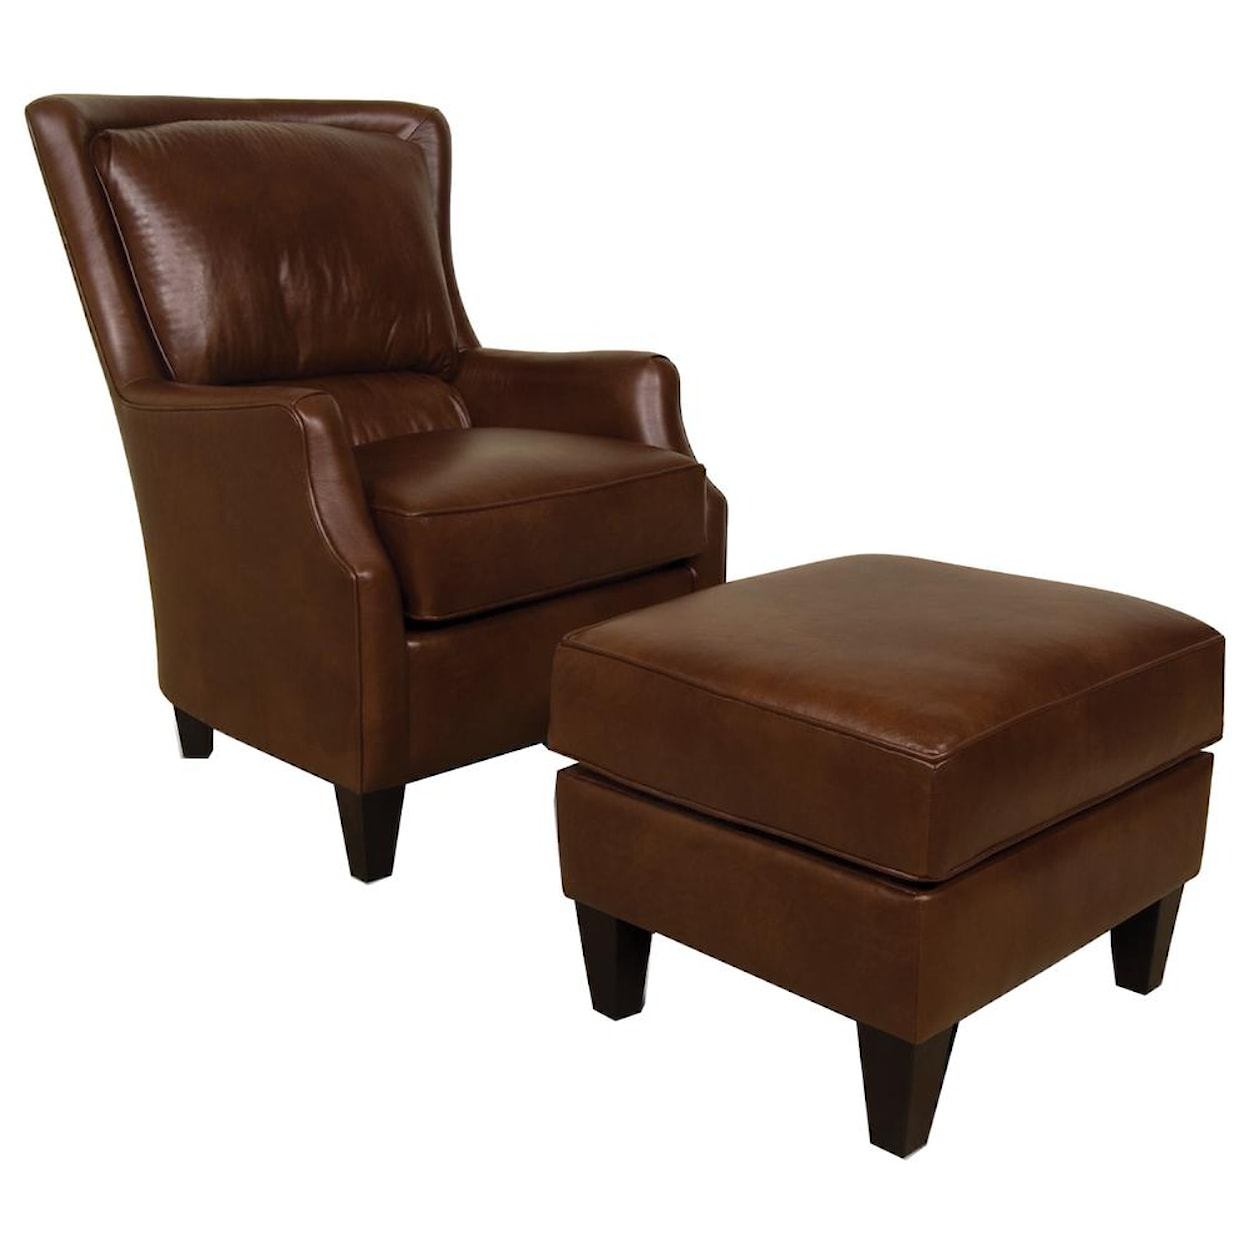 England LISETTE Upholstered Club Chair and Ottoman